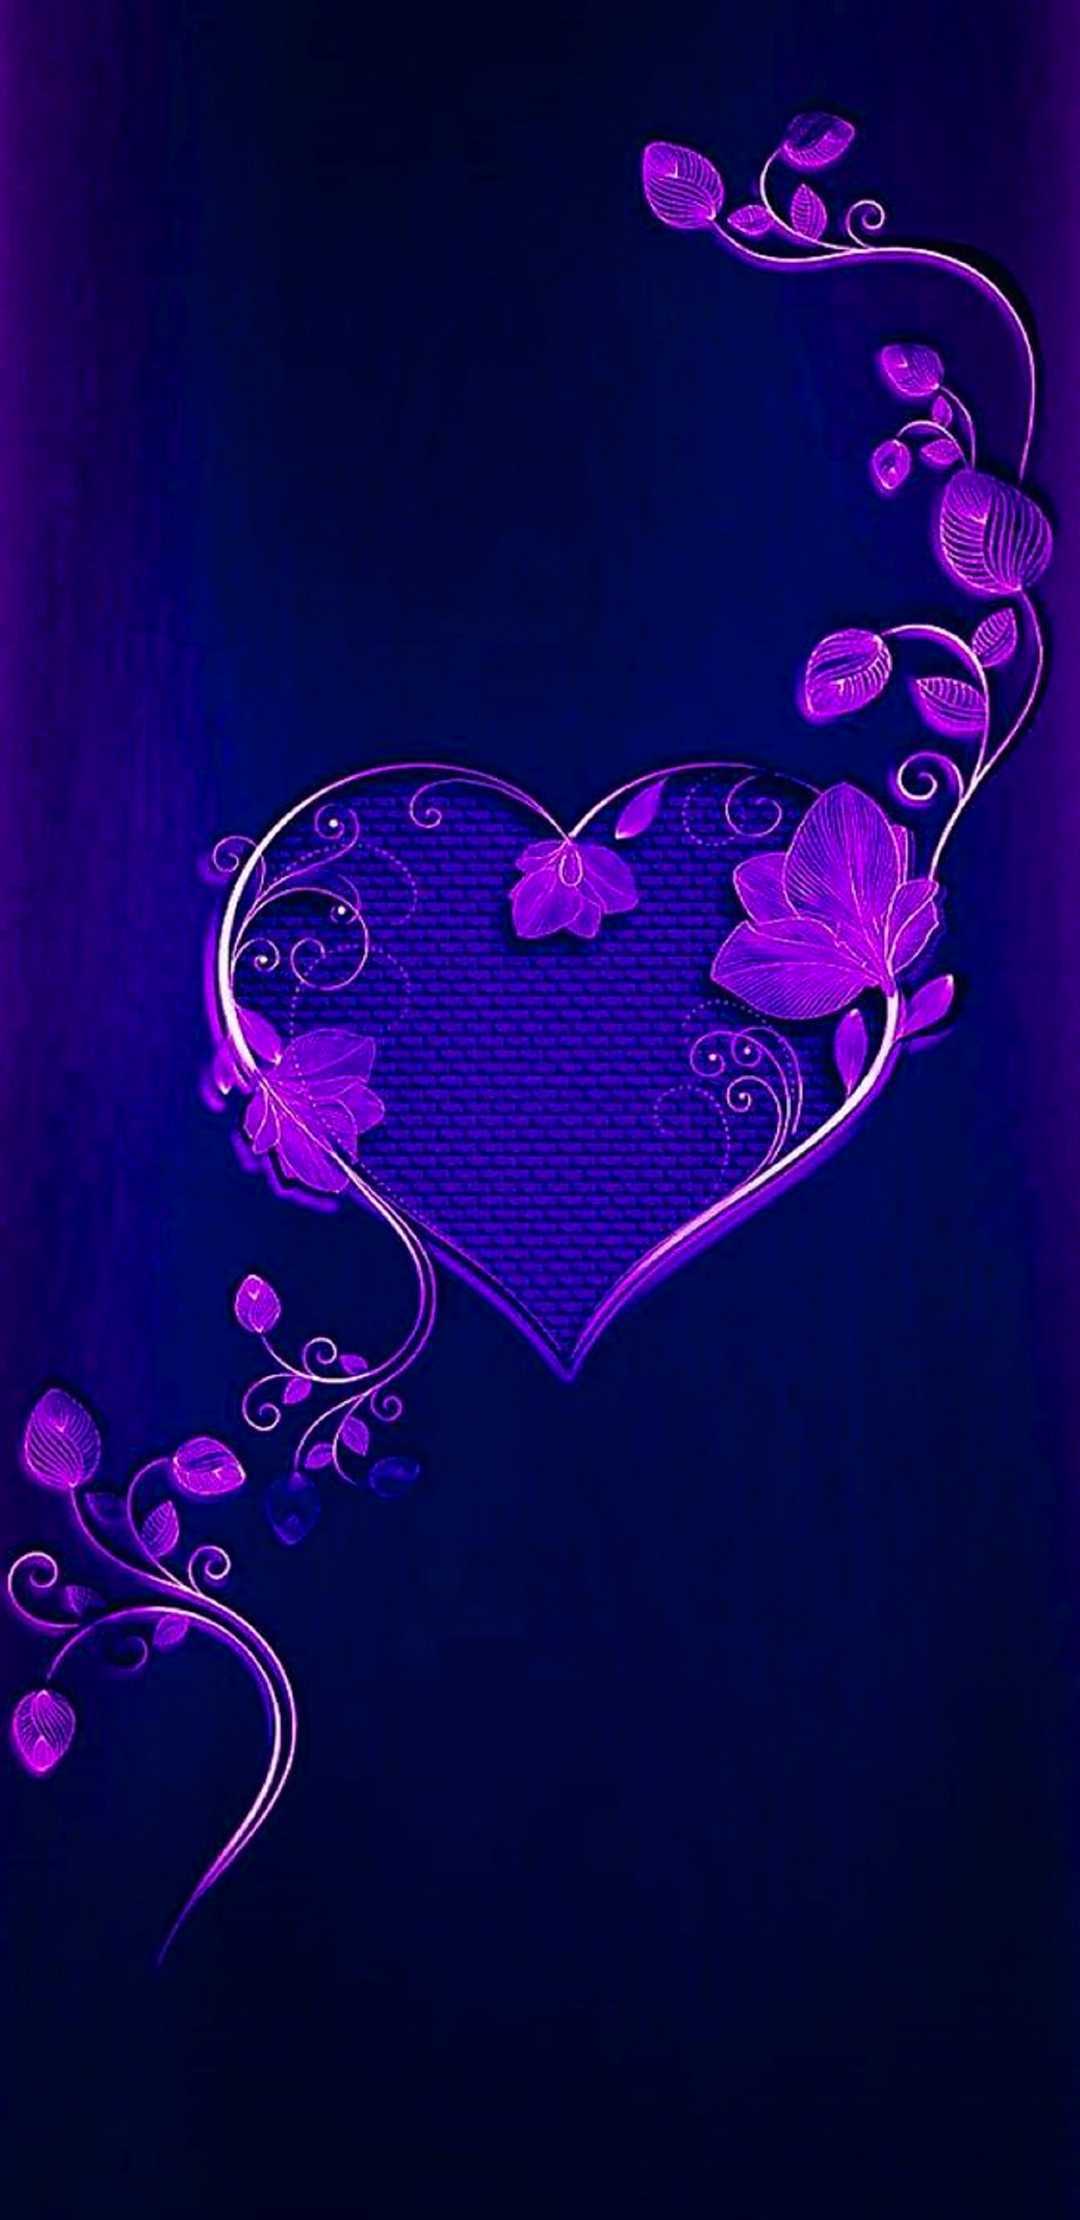 A purple heart with flowers and leaves on it - Heart